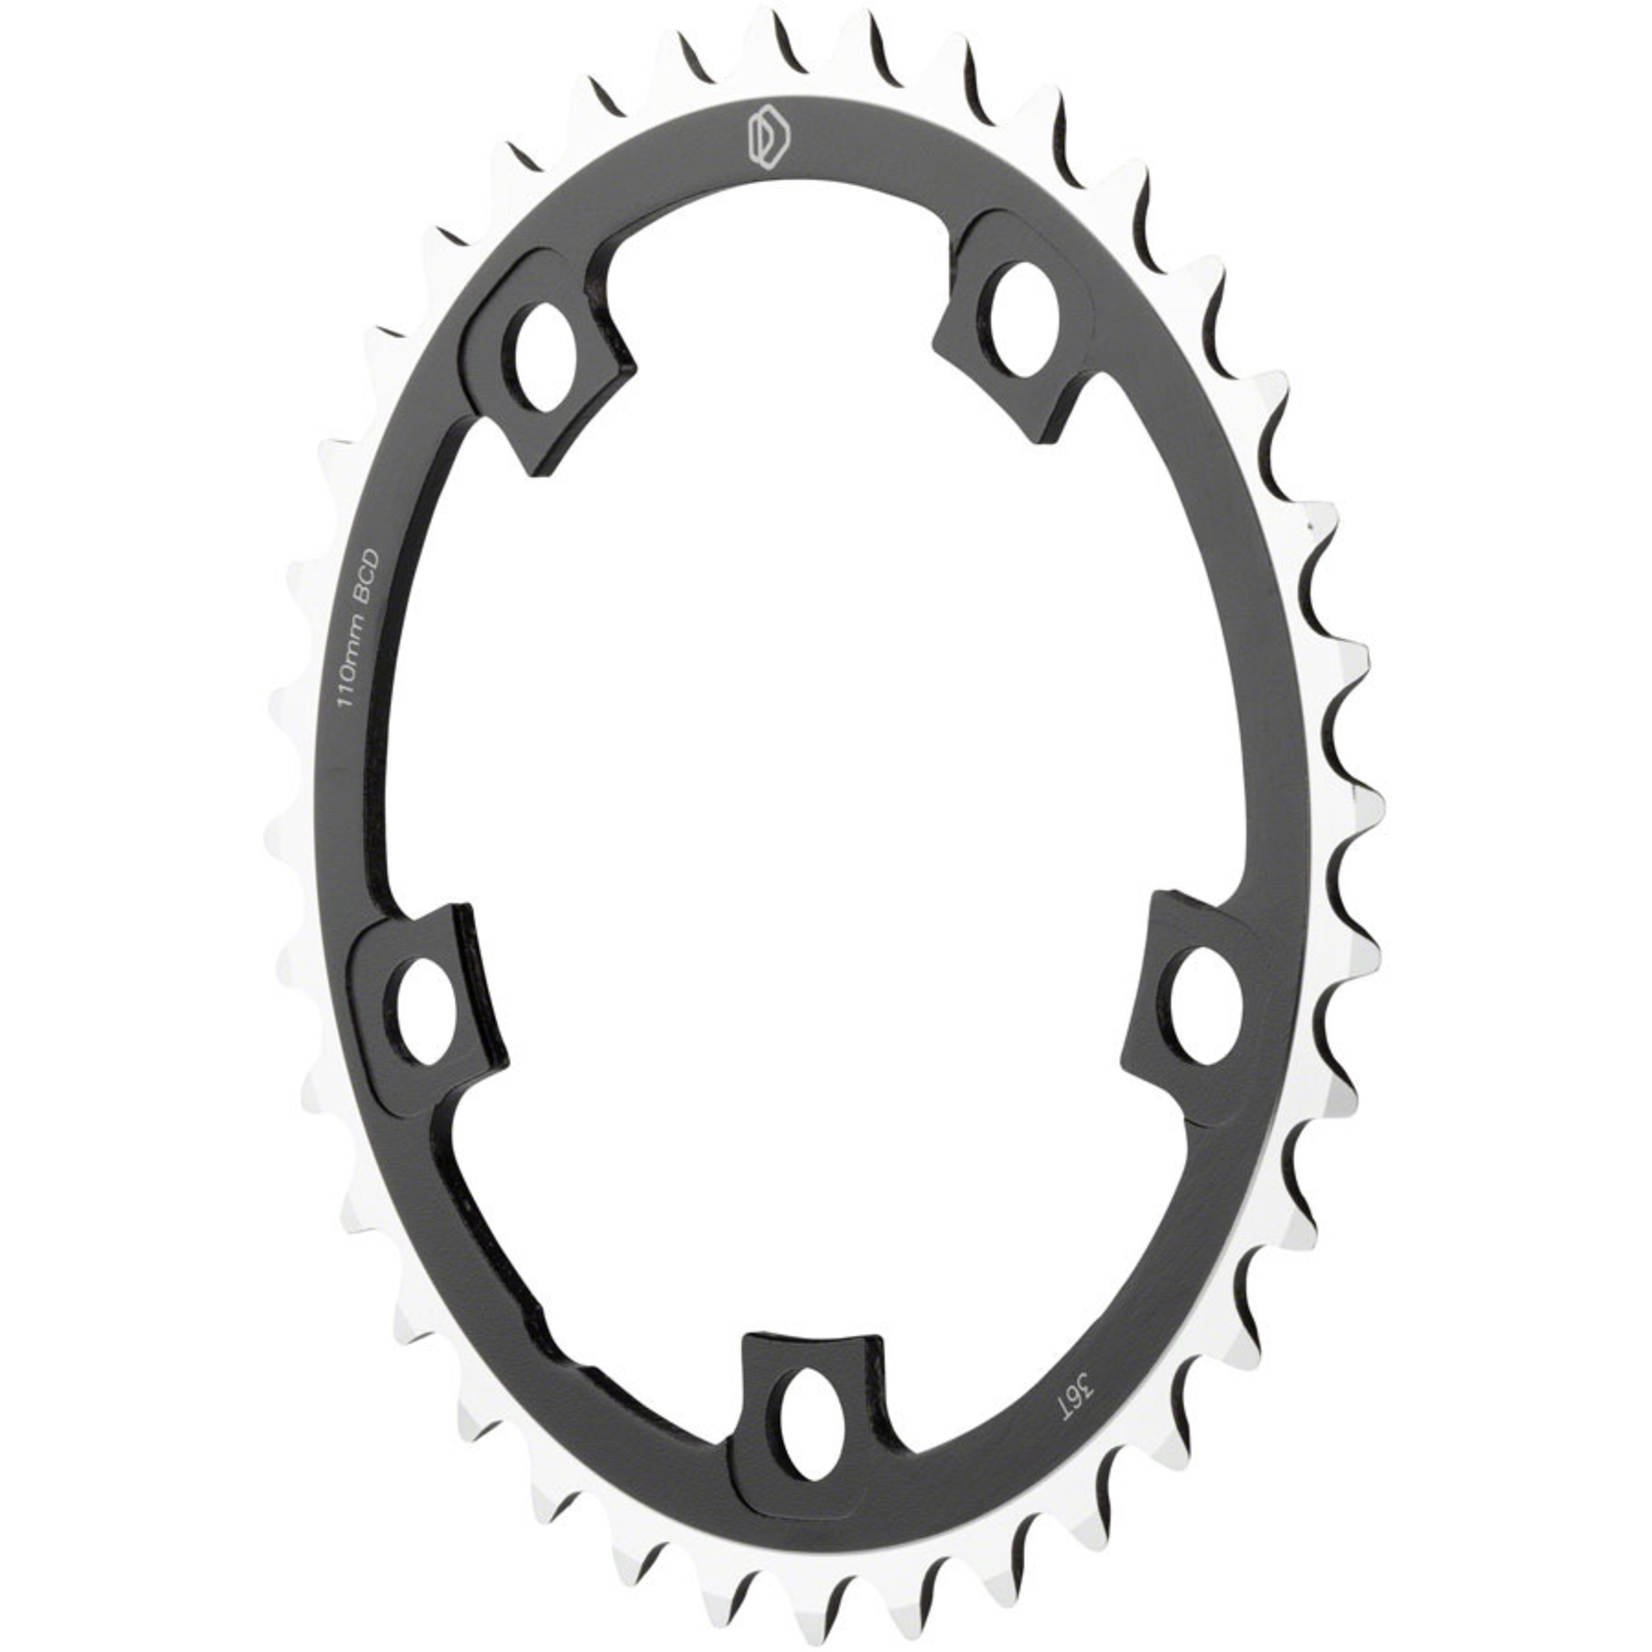 Dimension Dimension Multi Speed 36t x 110mm Middle Chainring Black